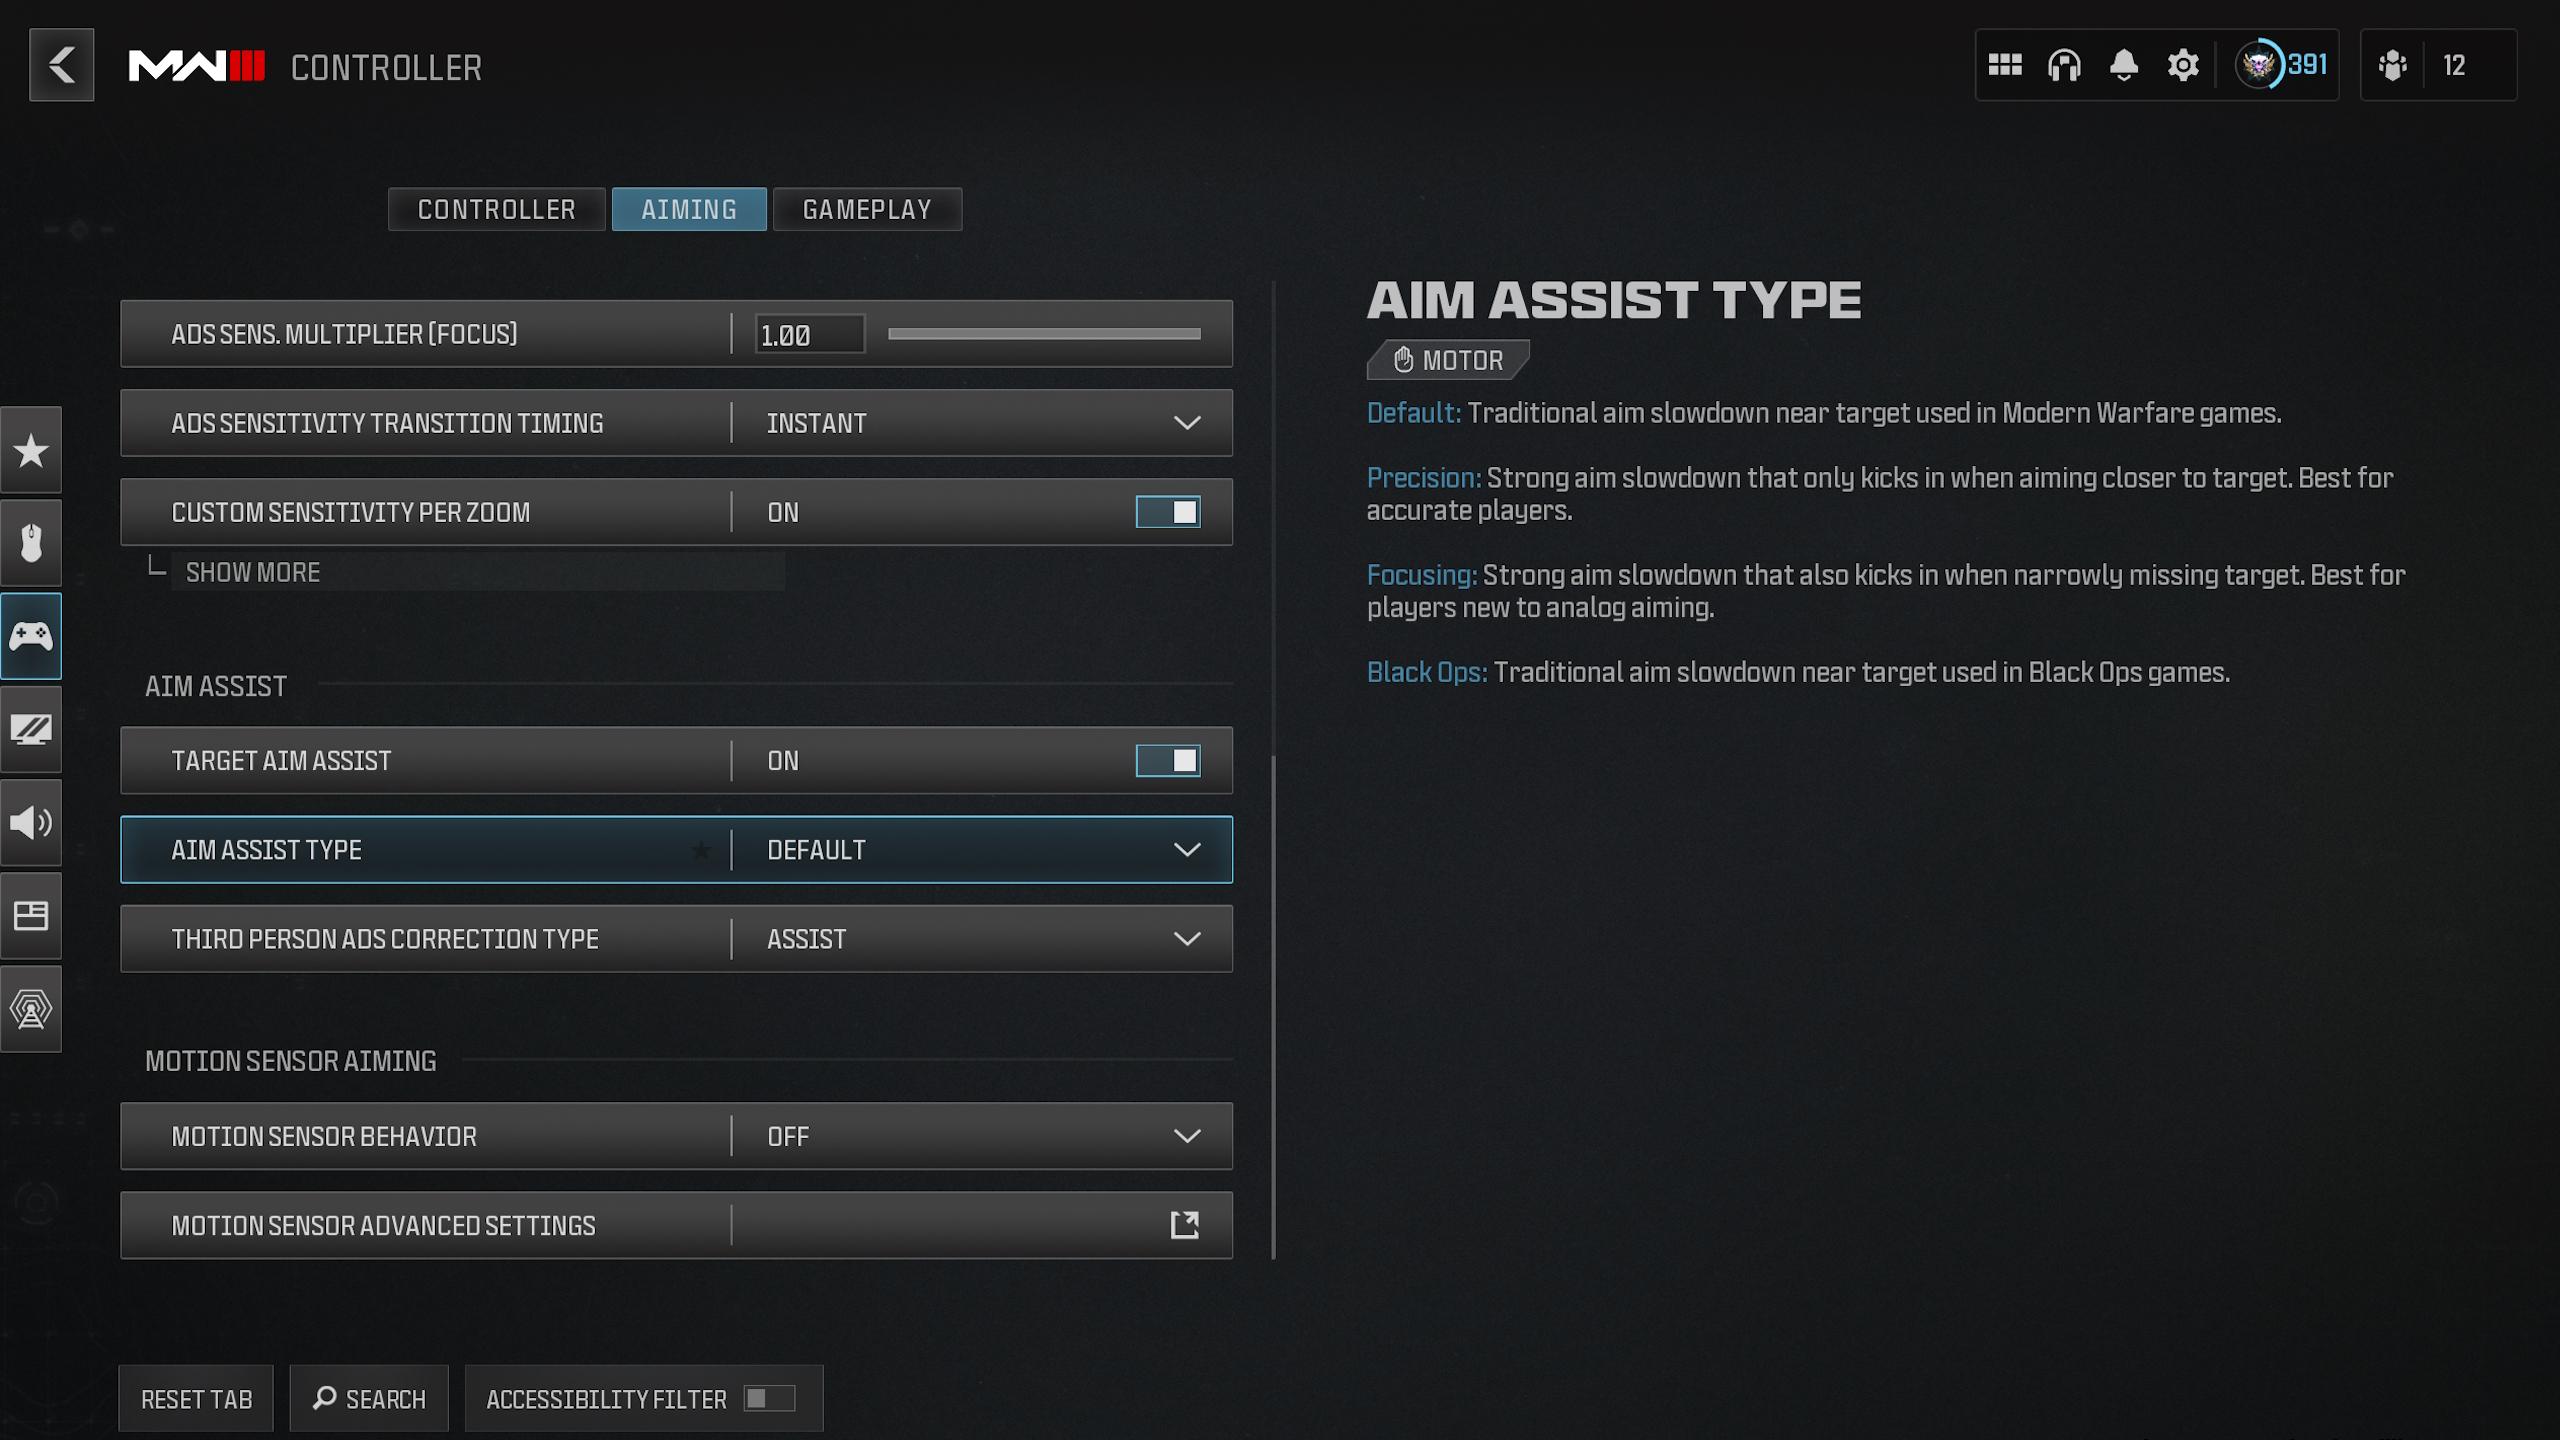 Best aim assist settings to use in MW3.